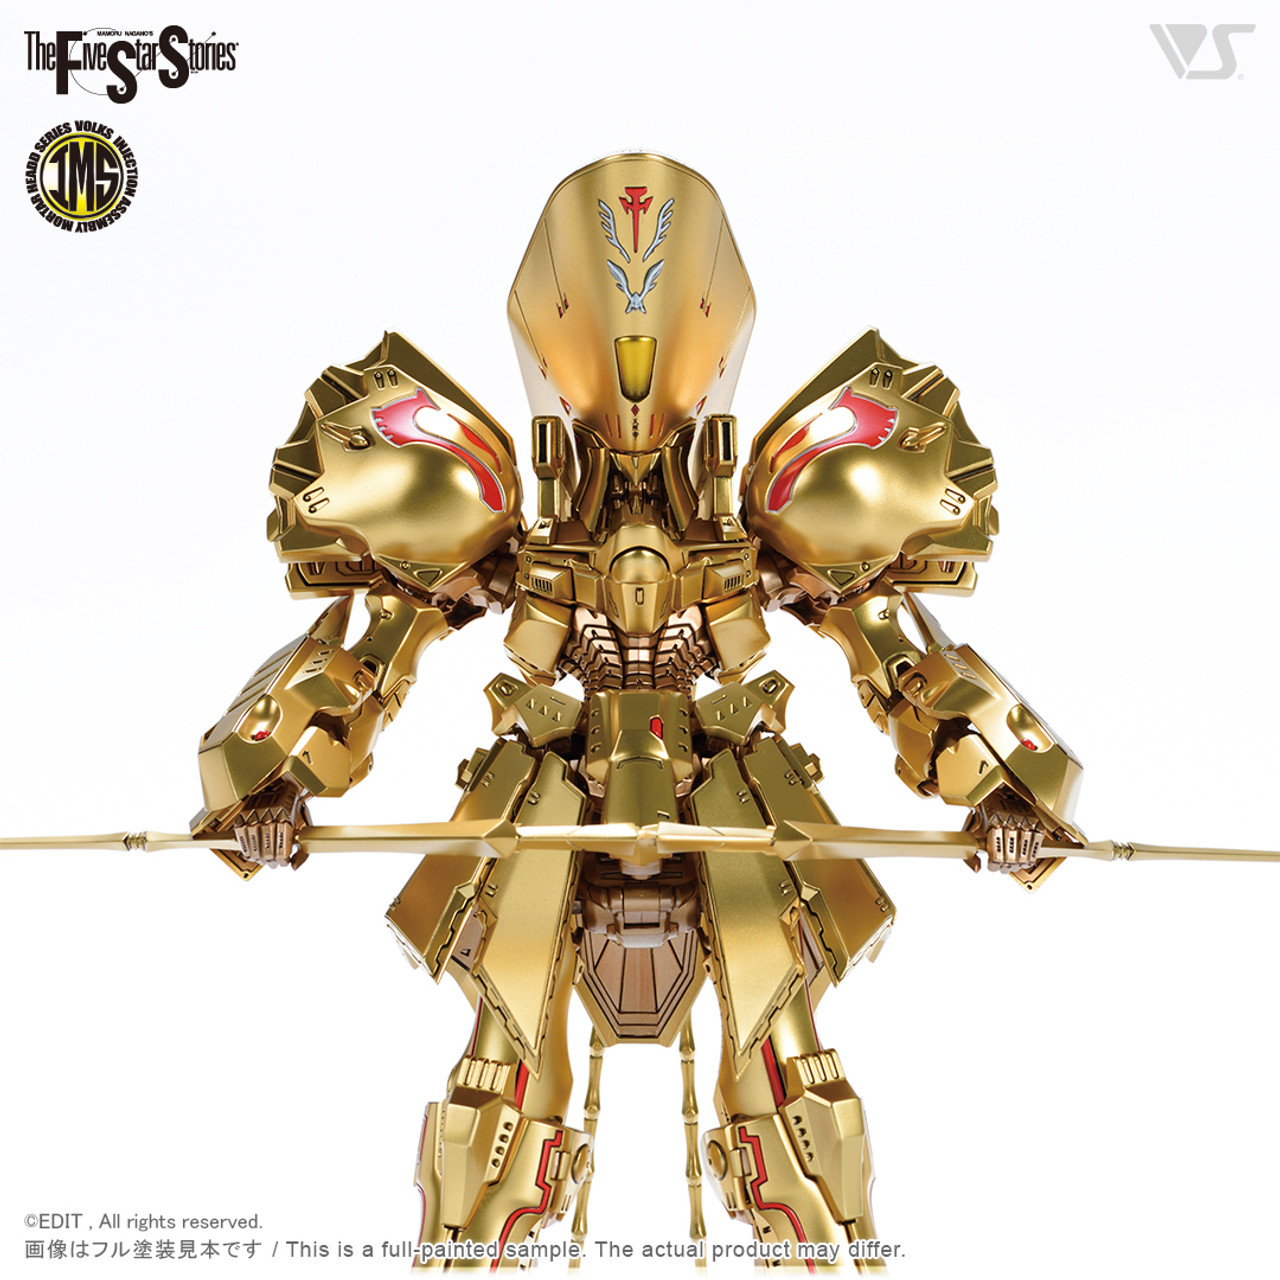 1/100 IMS THE KNIGHT OF GOLD = DELTA BERUNN 3007= PLASTIC INJECTION KIT